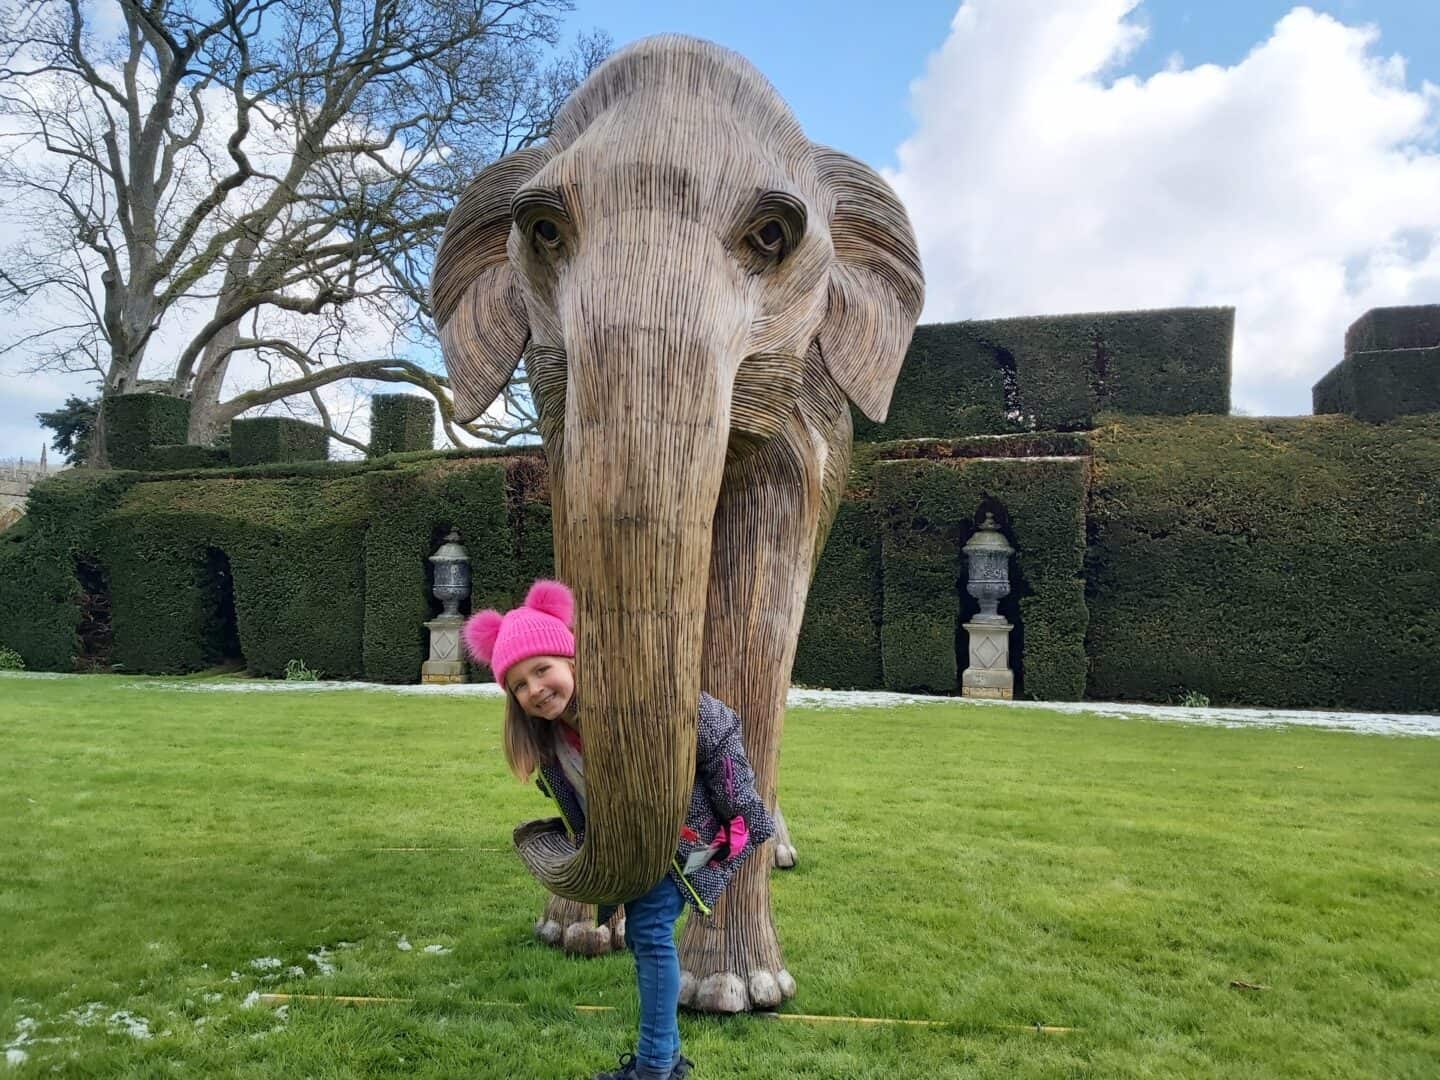 Little girl peeping out from behind elephant sculpture